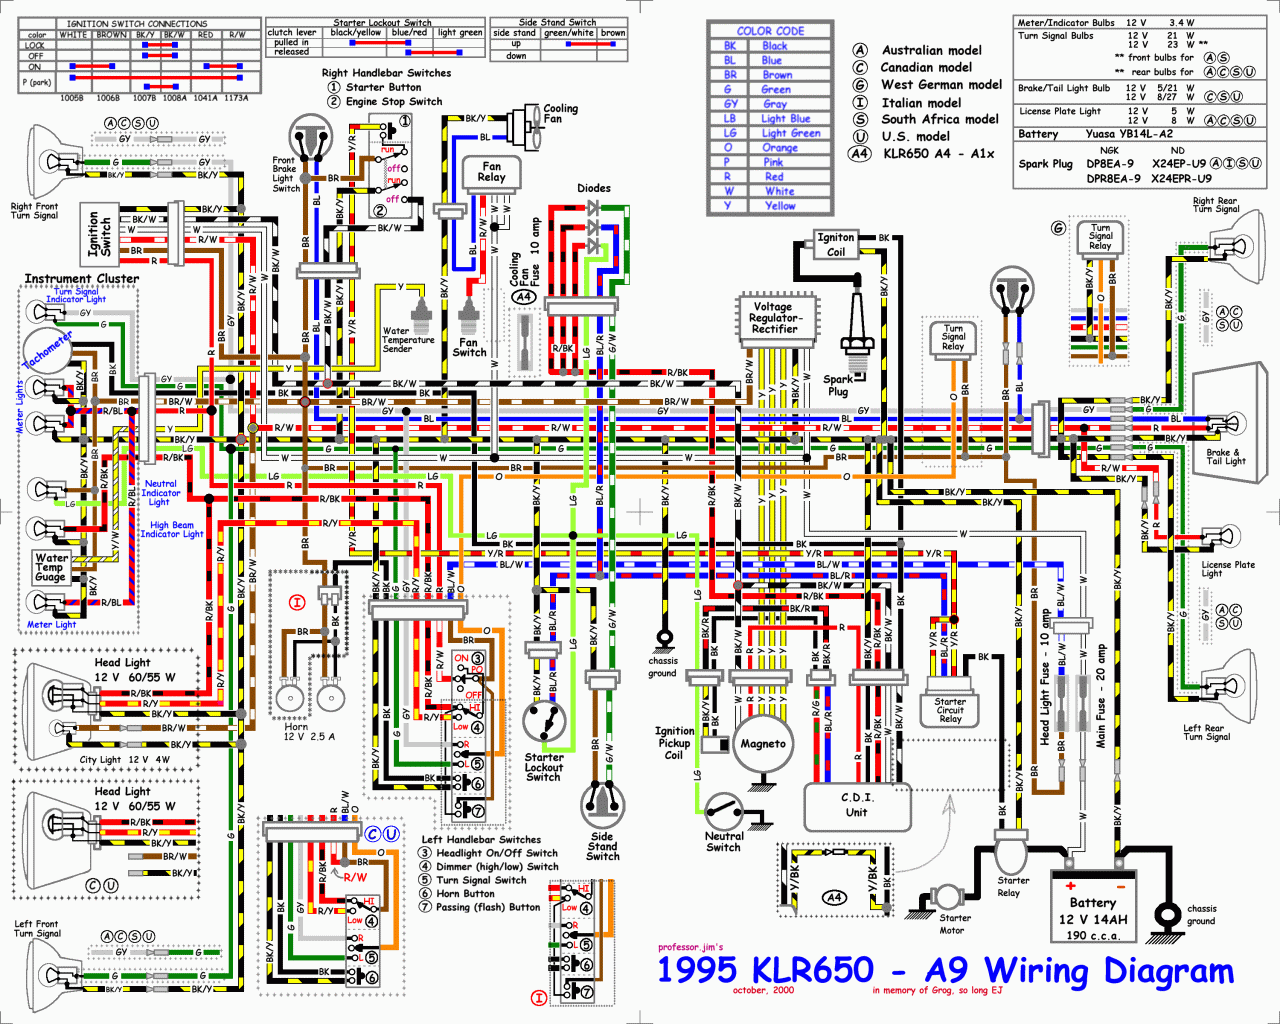 Wiring Diagram For A Trailer With Brakes